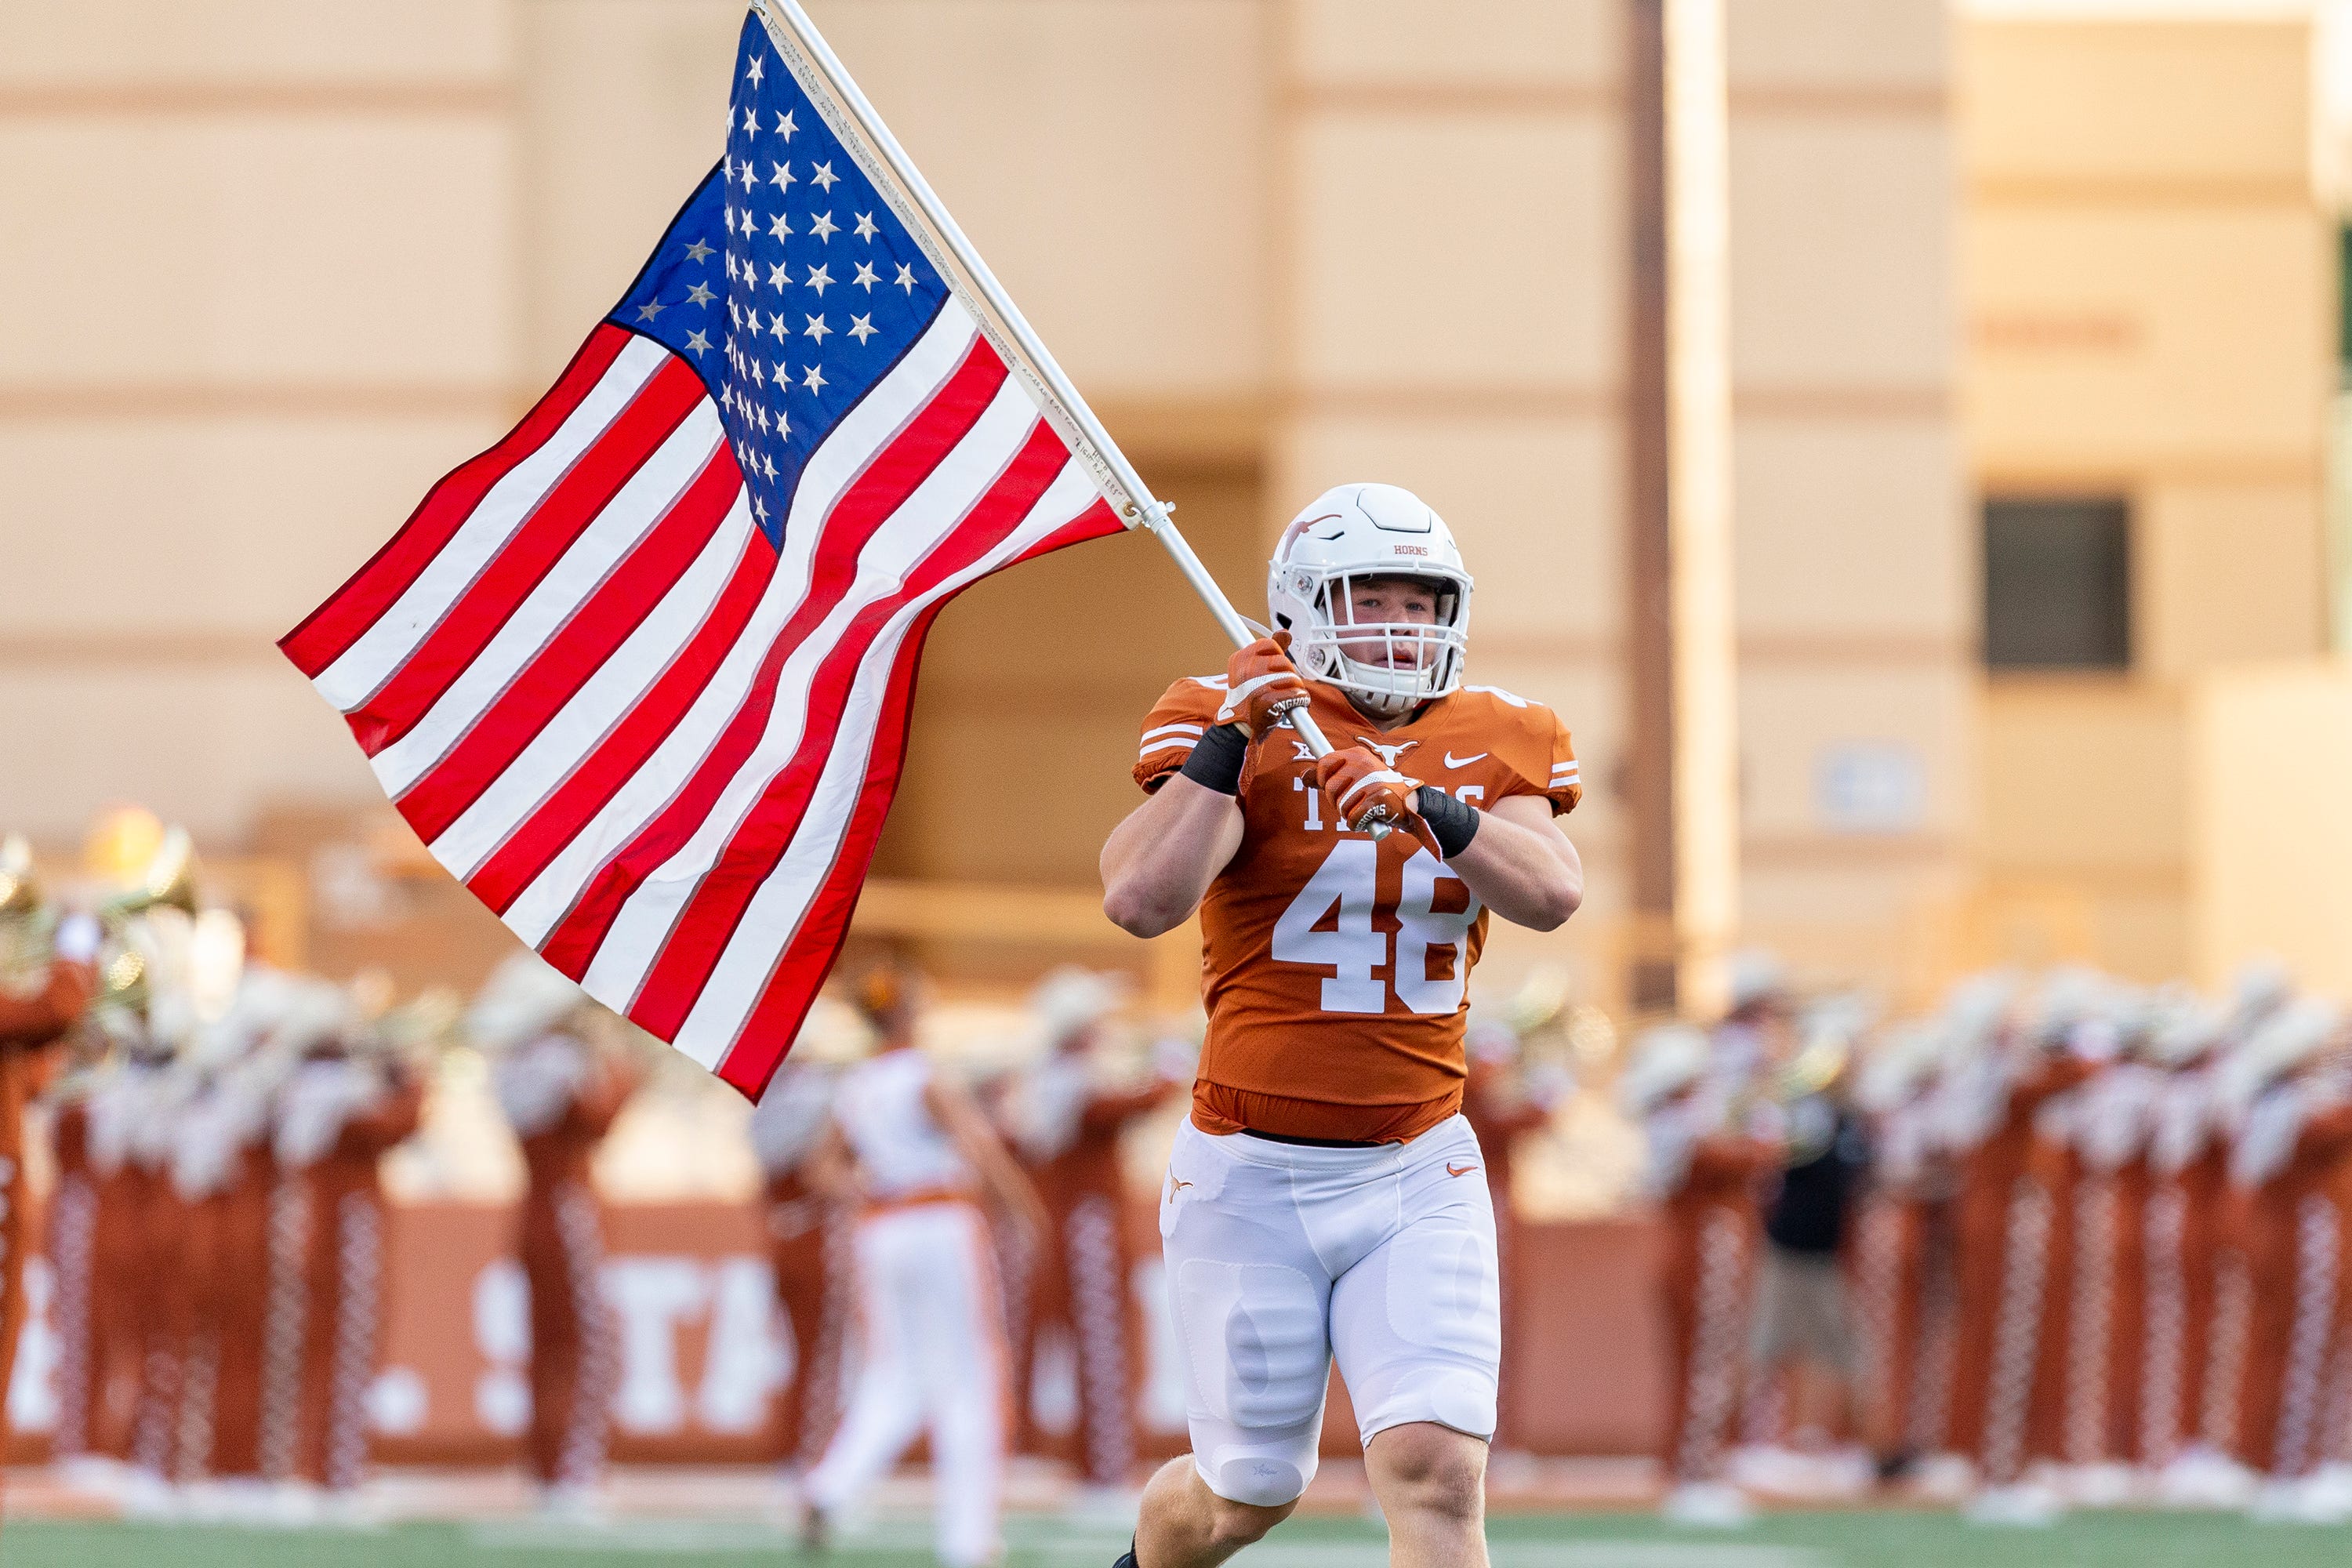 Family of Jake Ehlinger says late Texas football player died from 'accidental overdose'